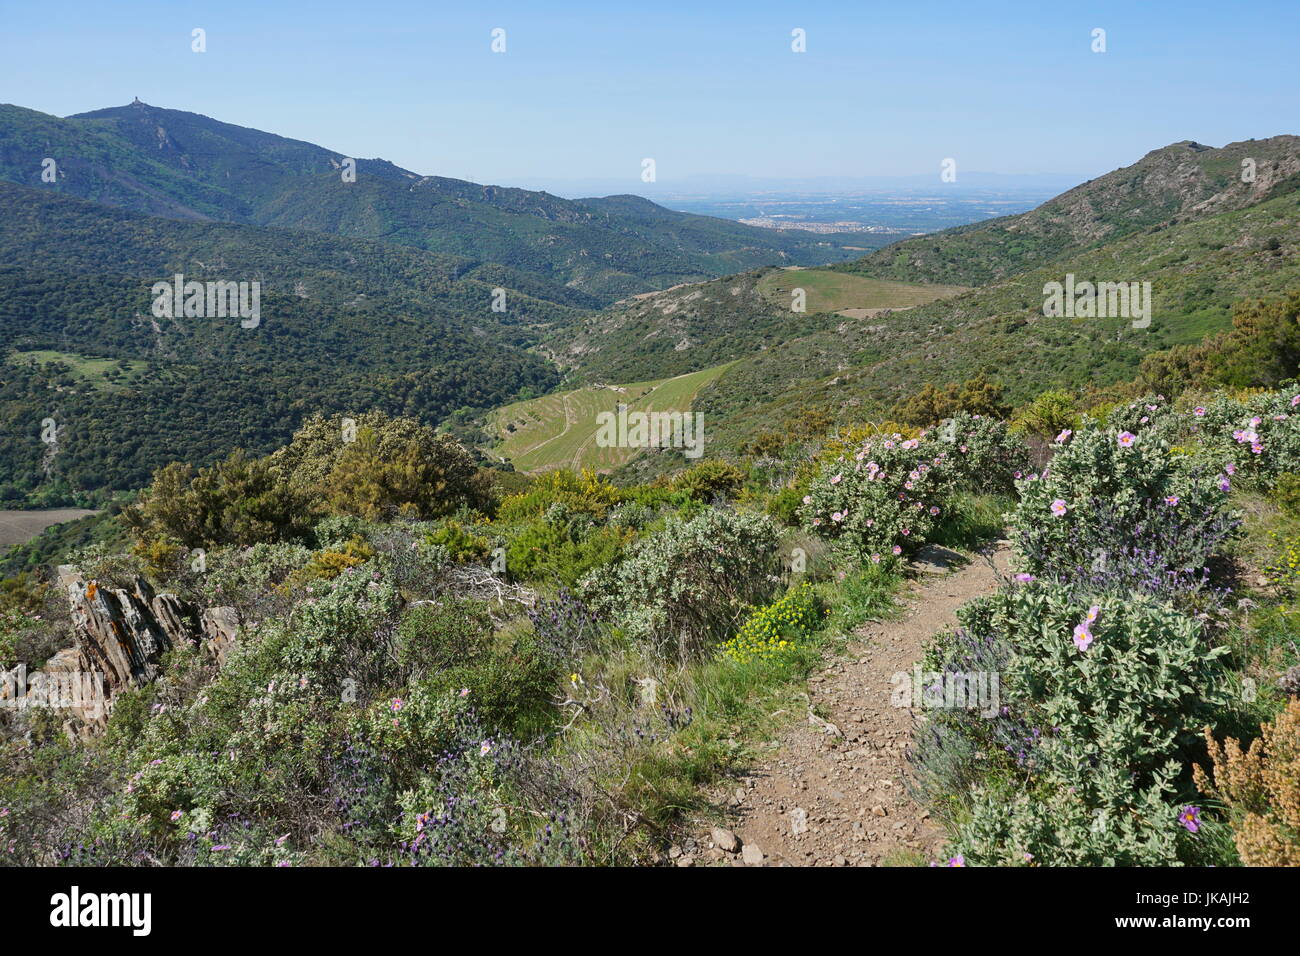 Landscape the valley Le Rimbau from the mountains of the massif des Alberes, Pyrenees Orientales, Roussillon, south of France, Mediterranean Stock Photo